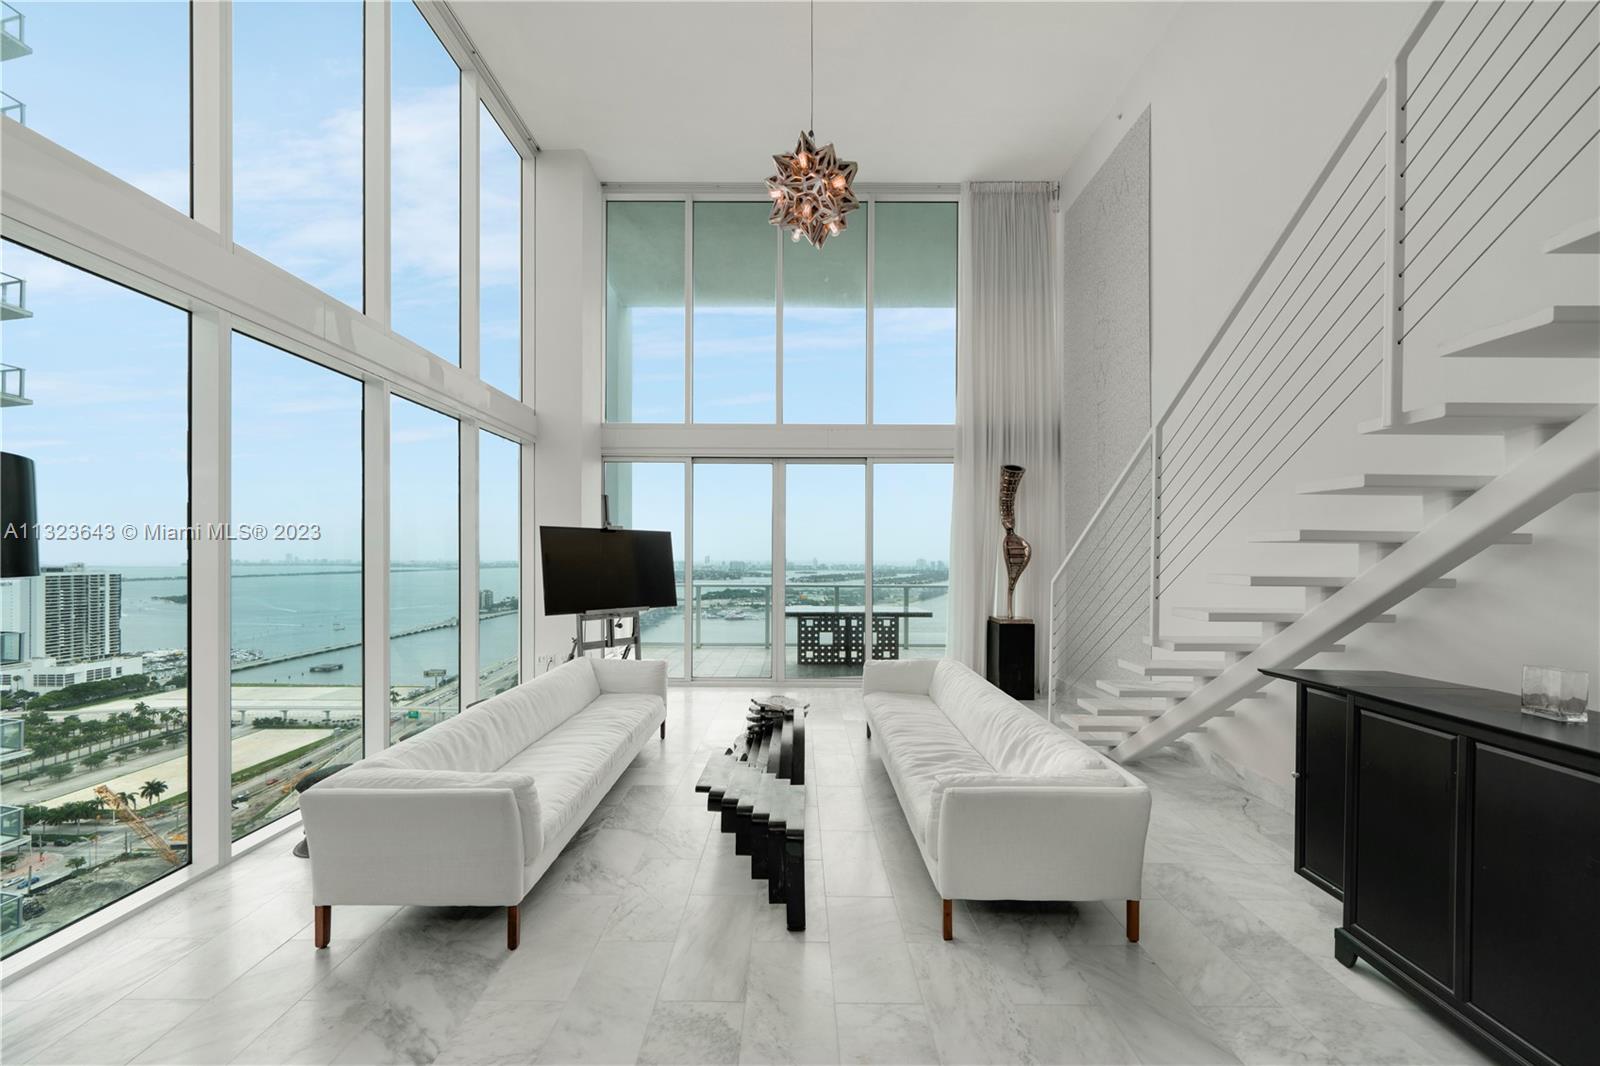 Beautiful 2-story loft at Ten Museum Park with 2 Bedrooms, 2.5 Baths, 1,730 interior square feet, Carrera white marble flooring throughout, renovated bathrooms, stainless steel kitchen appliances, and 20-foot-high ceilings overlooking the park and Biscayne Bay. Includes 2 parking spaces. Building amenities include swimming pools, hot tub, fitness center, spa, 24-hour valet parking service, and 24-hour concierge.